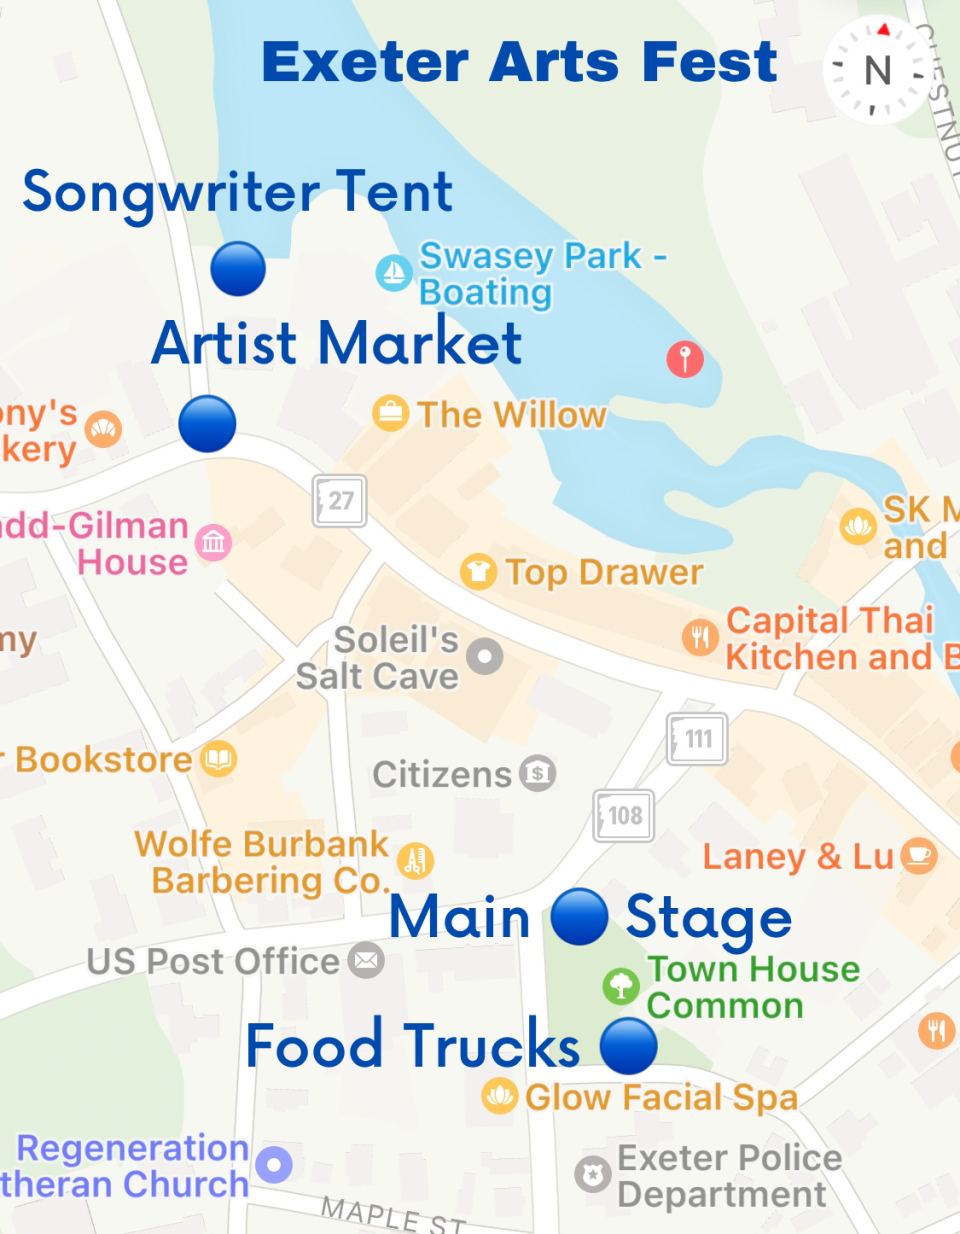 The Exeter Arts and Music Festival 2023 will take place at Town House Common and at the entrance of Swasey Parkway.